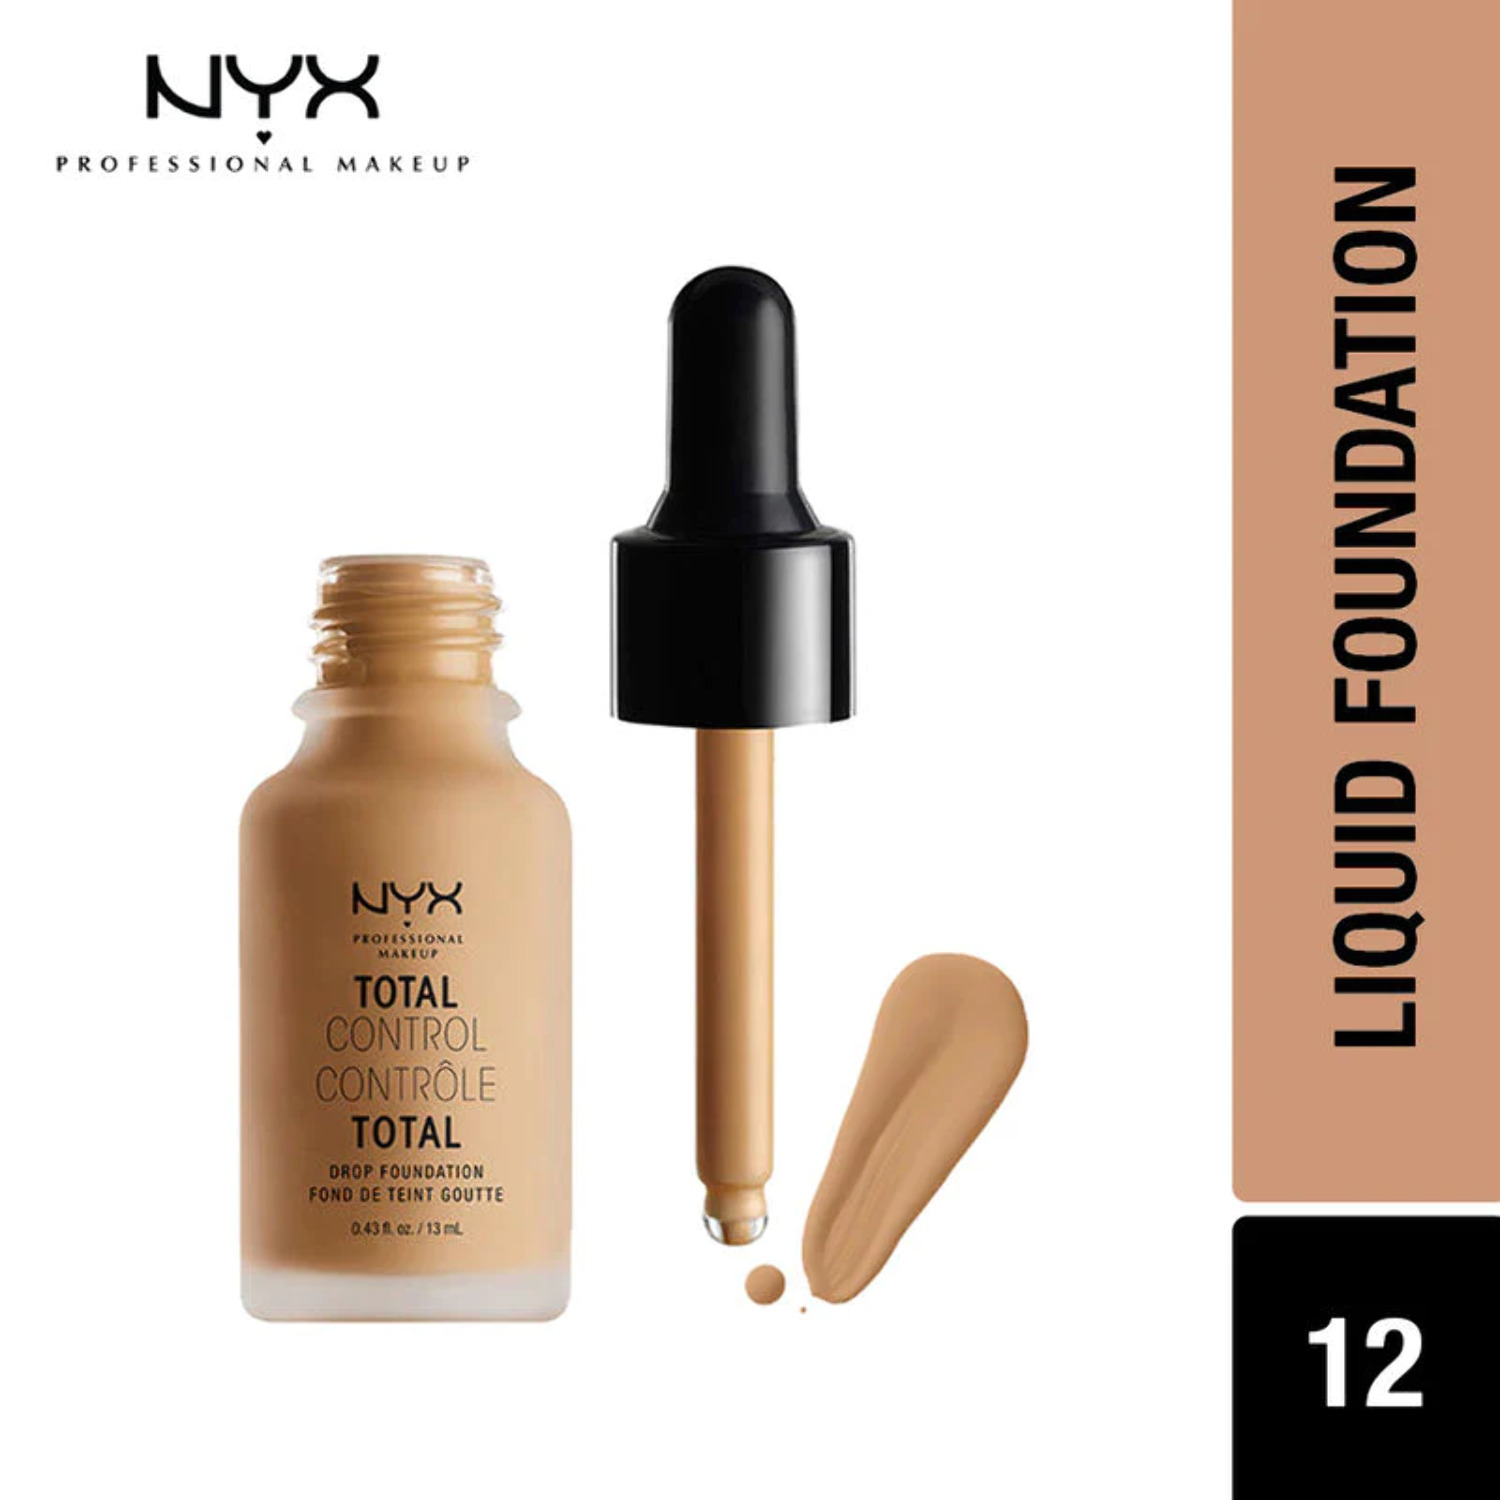 NYX Professional Makeup Total Control Drop Foundation, True Beige - image 3 of 6